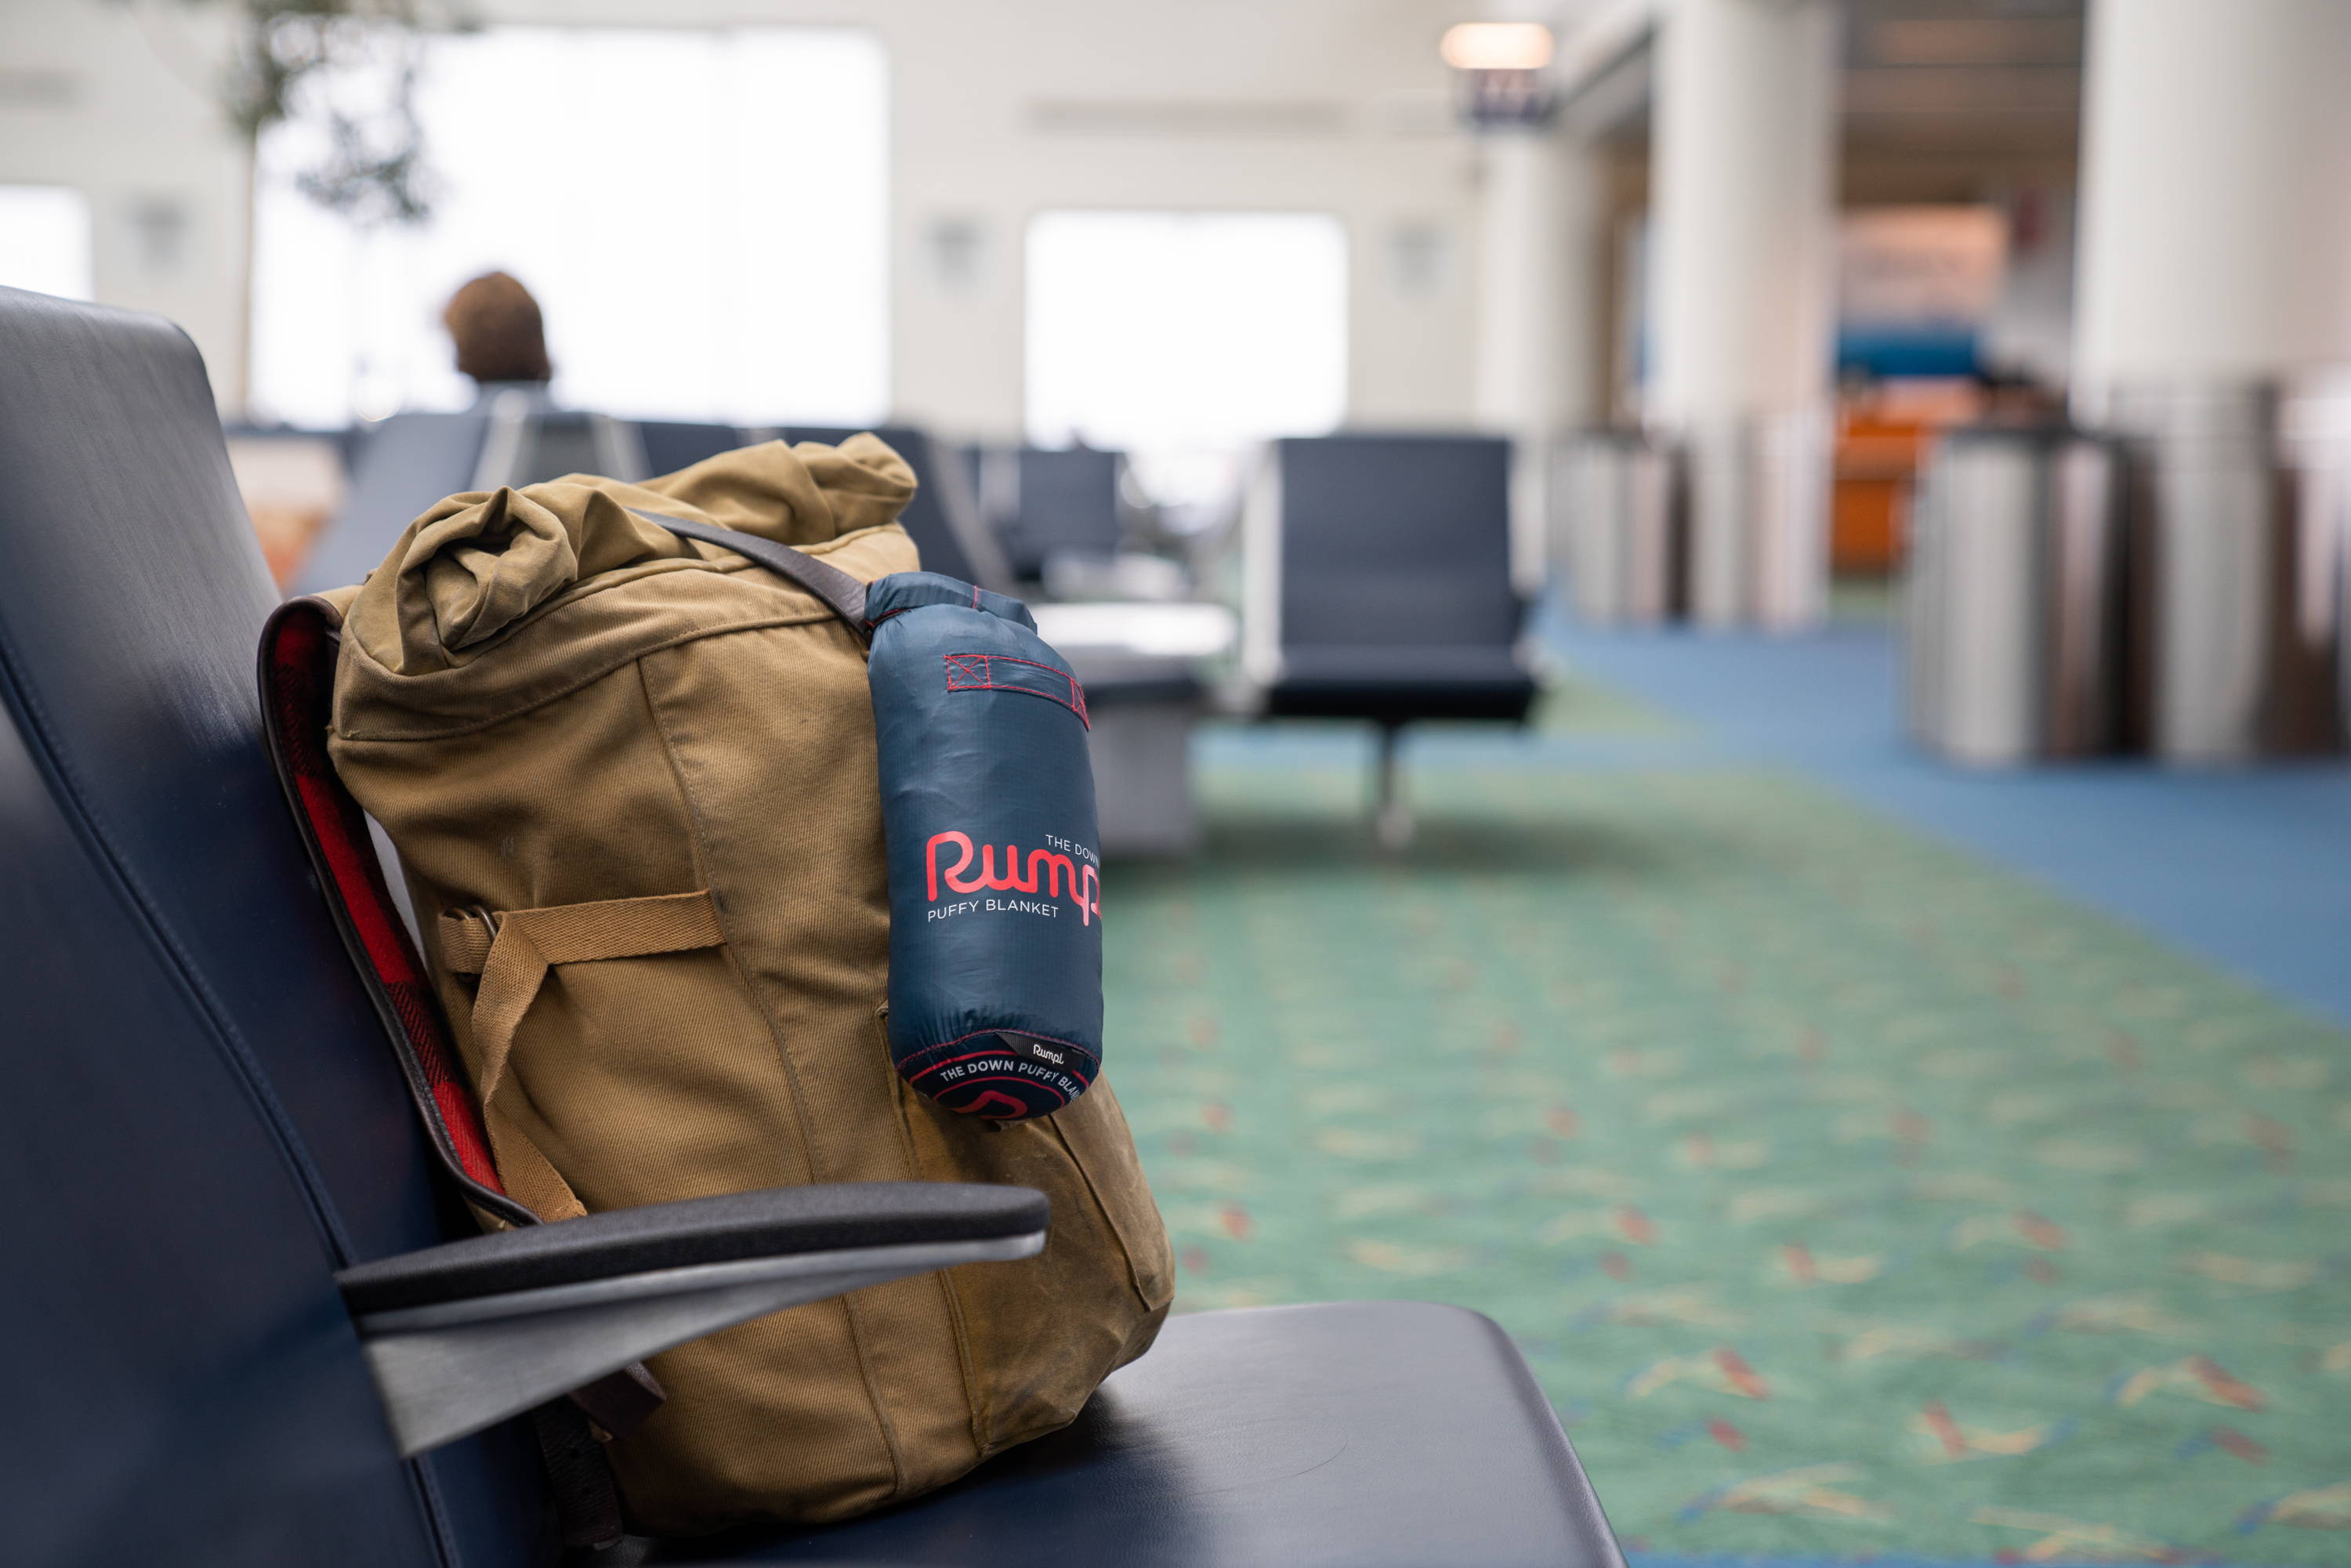 Rumpl Travel blanket attached to bag in airport